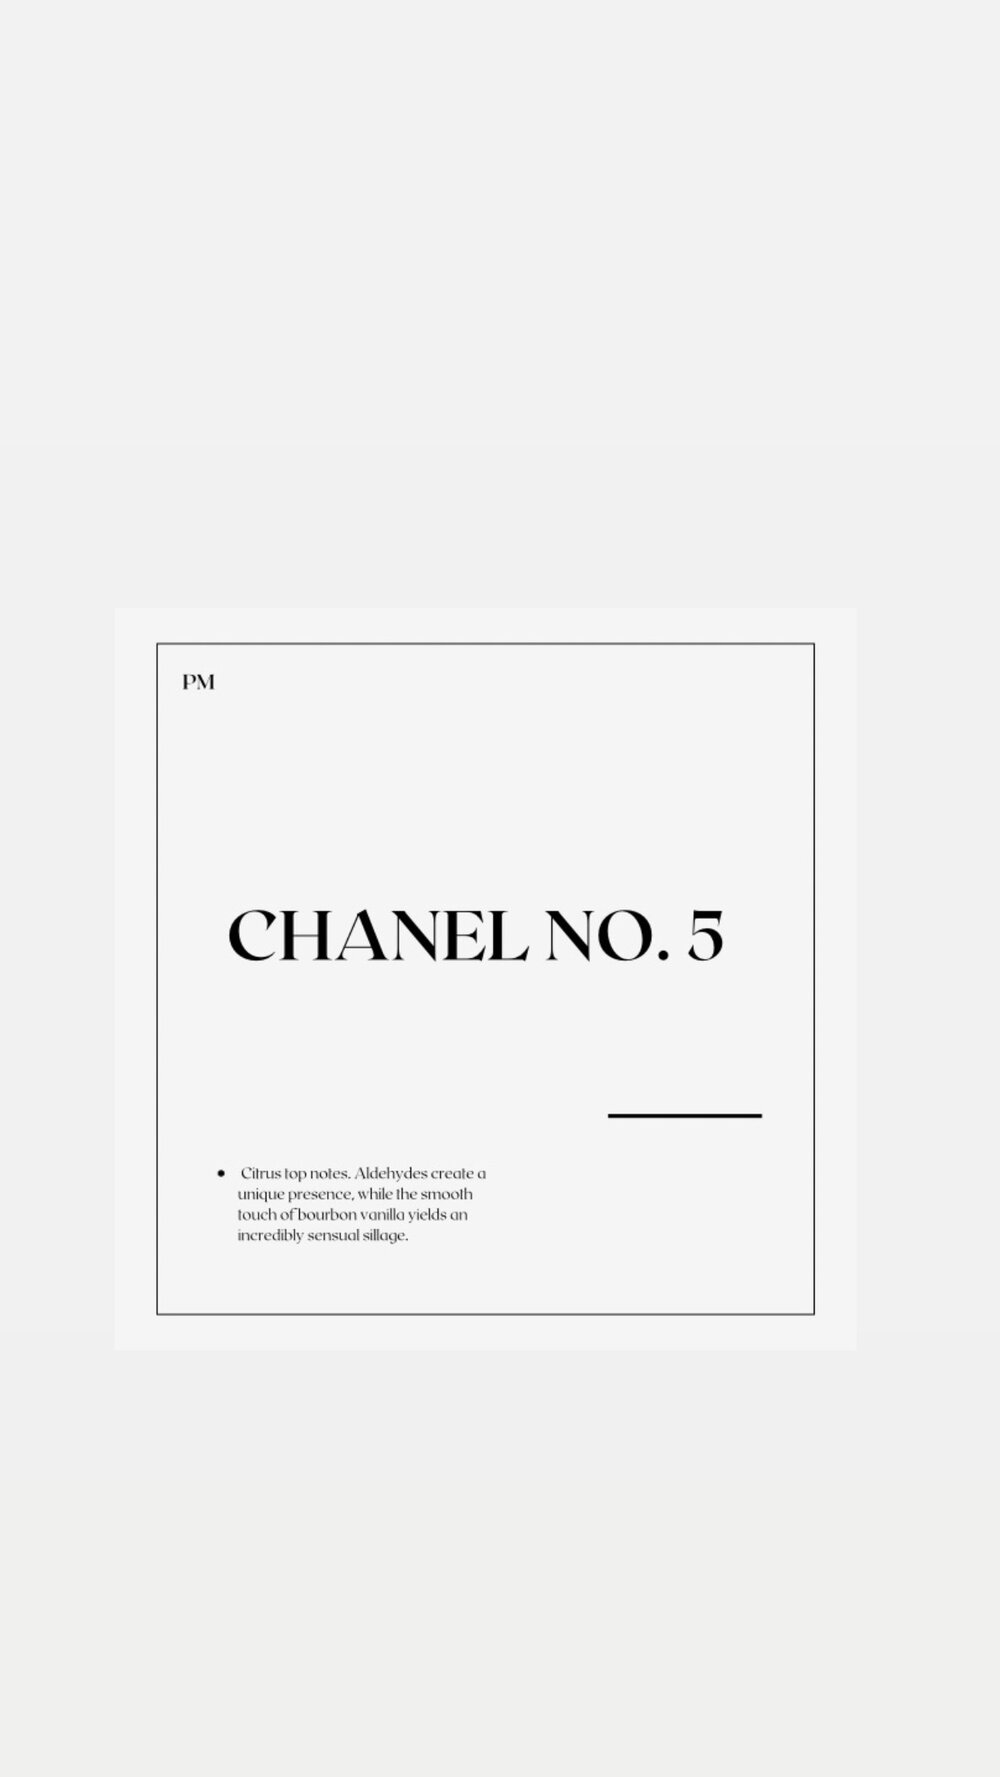 Chanel no. 5 ( dupe ) — pmcandles